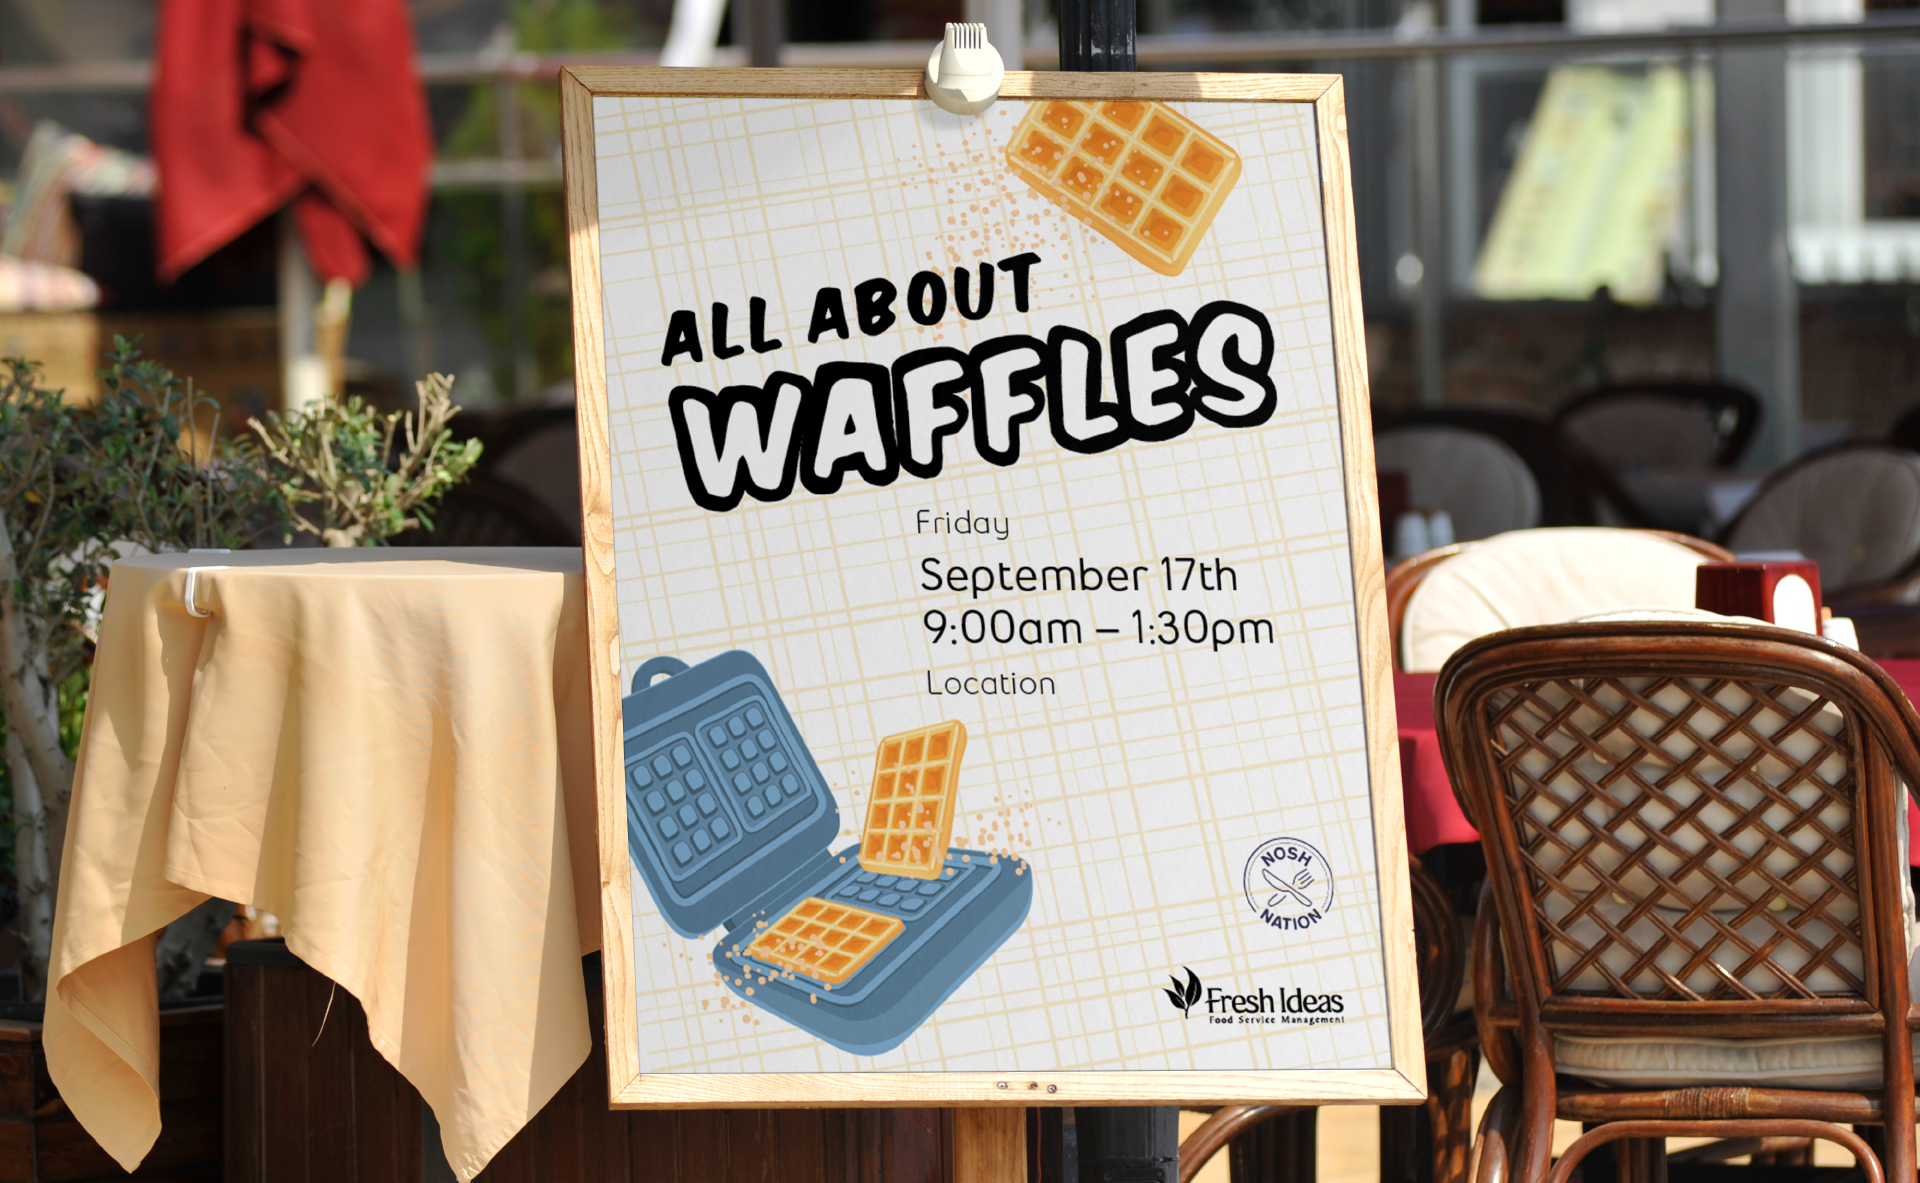 Poster outside of a restaurant advertising a waffles event.